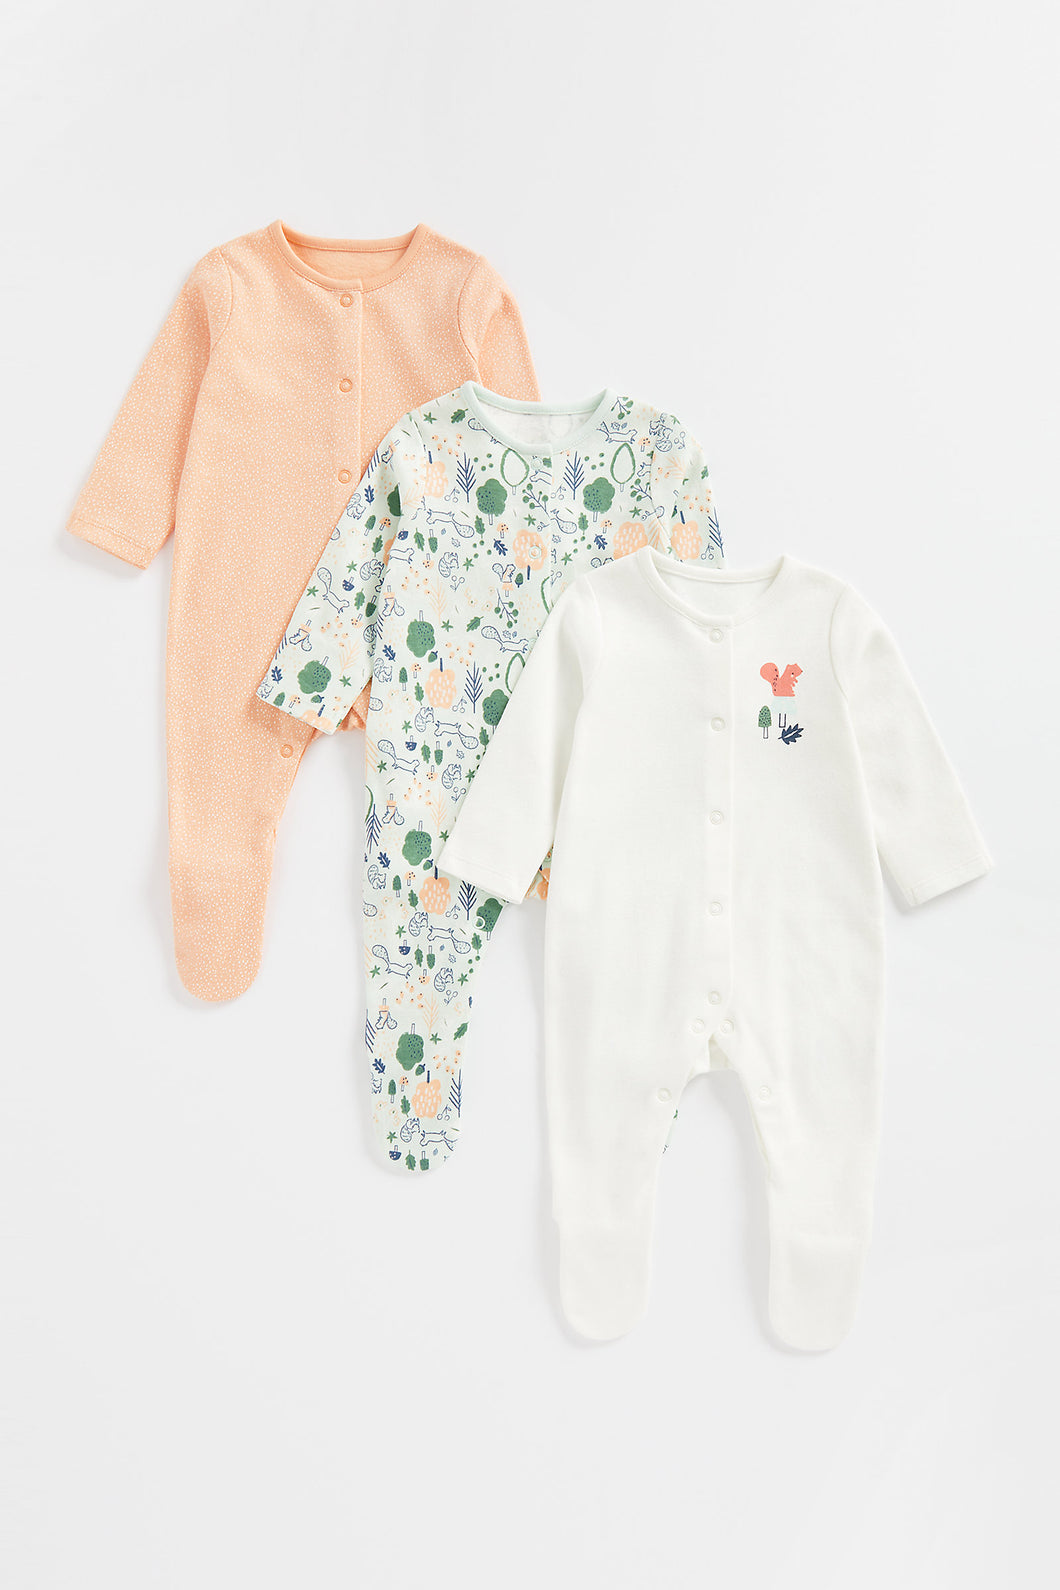 Mothercare Woodland Sleepsuits - 3 Pack